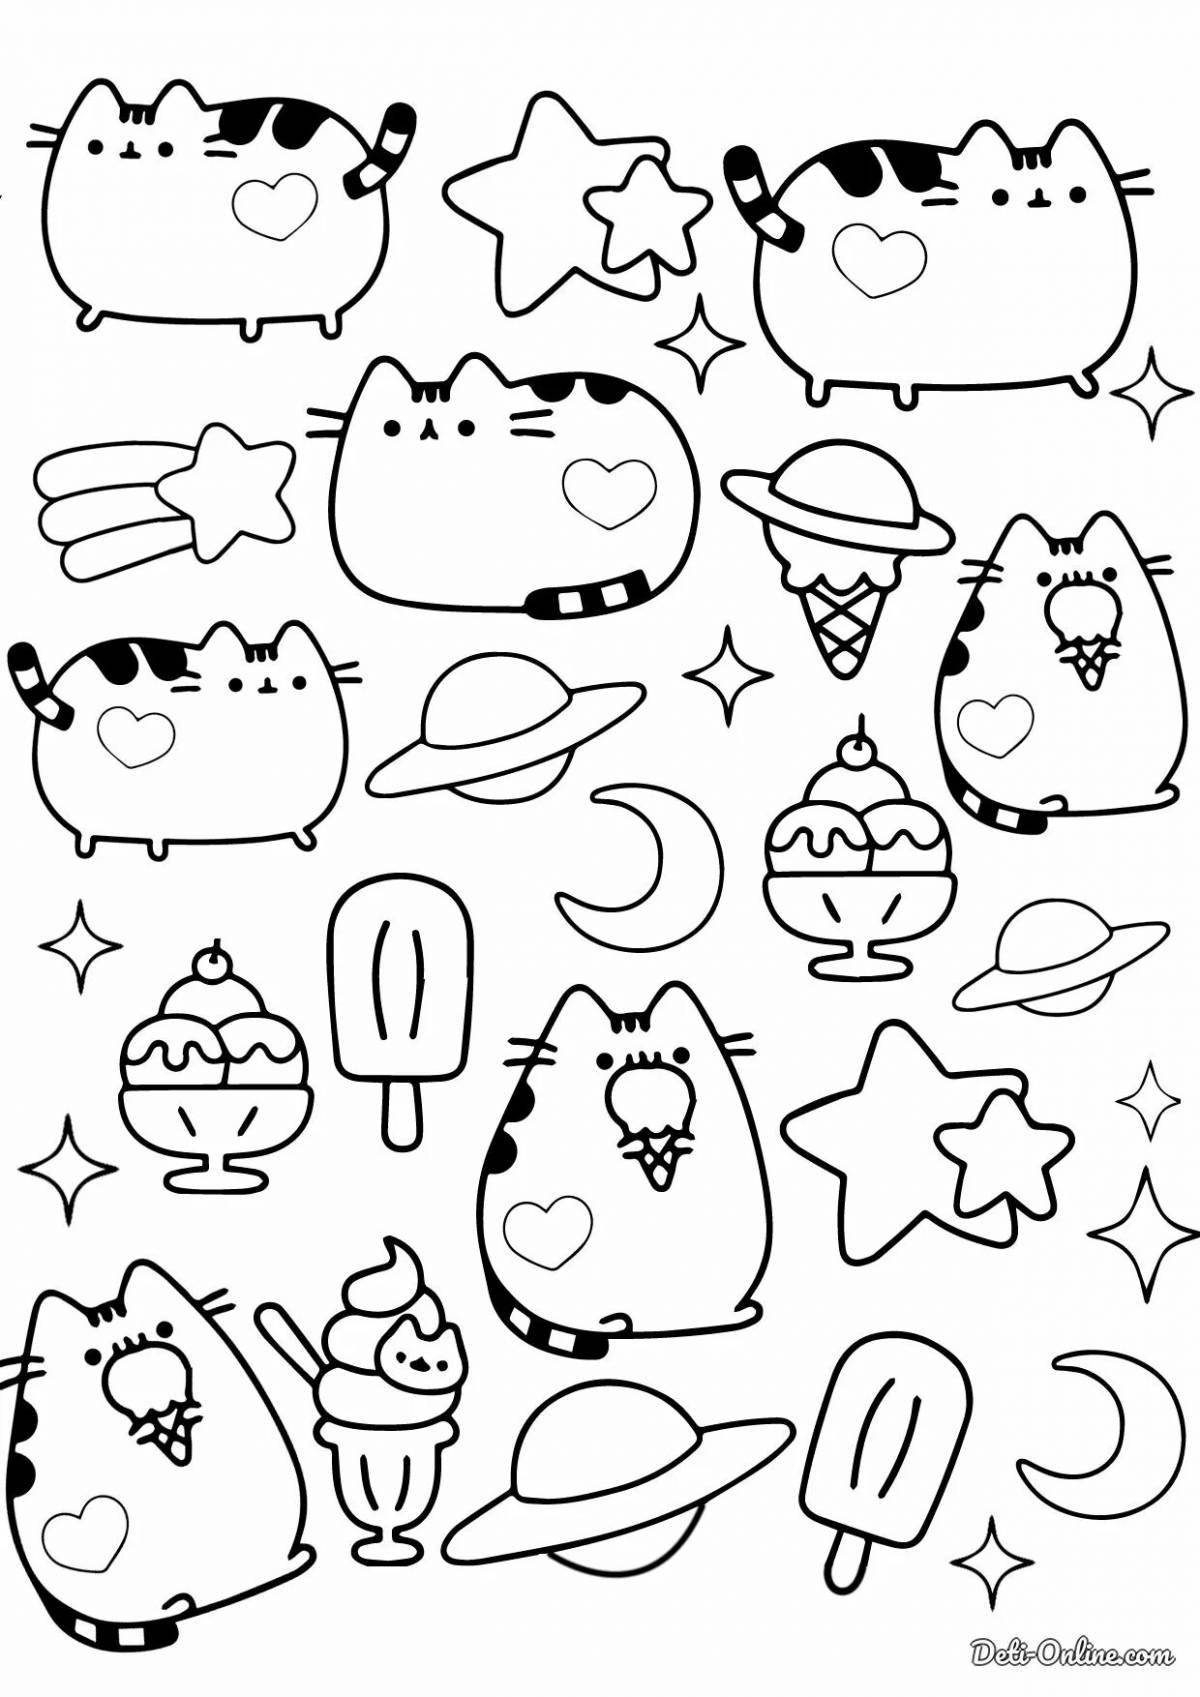 Radiant pusheen coloring book for kids